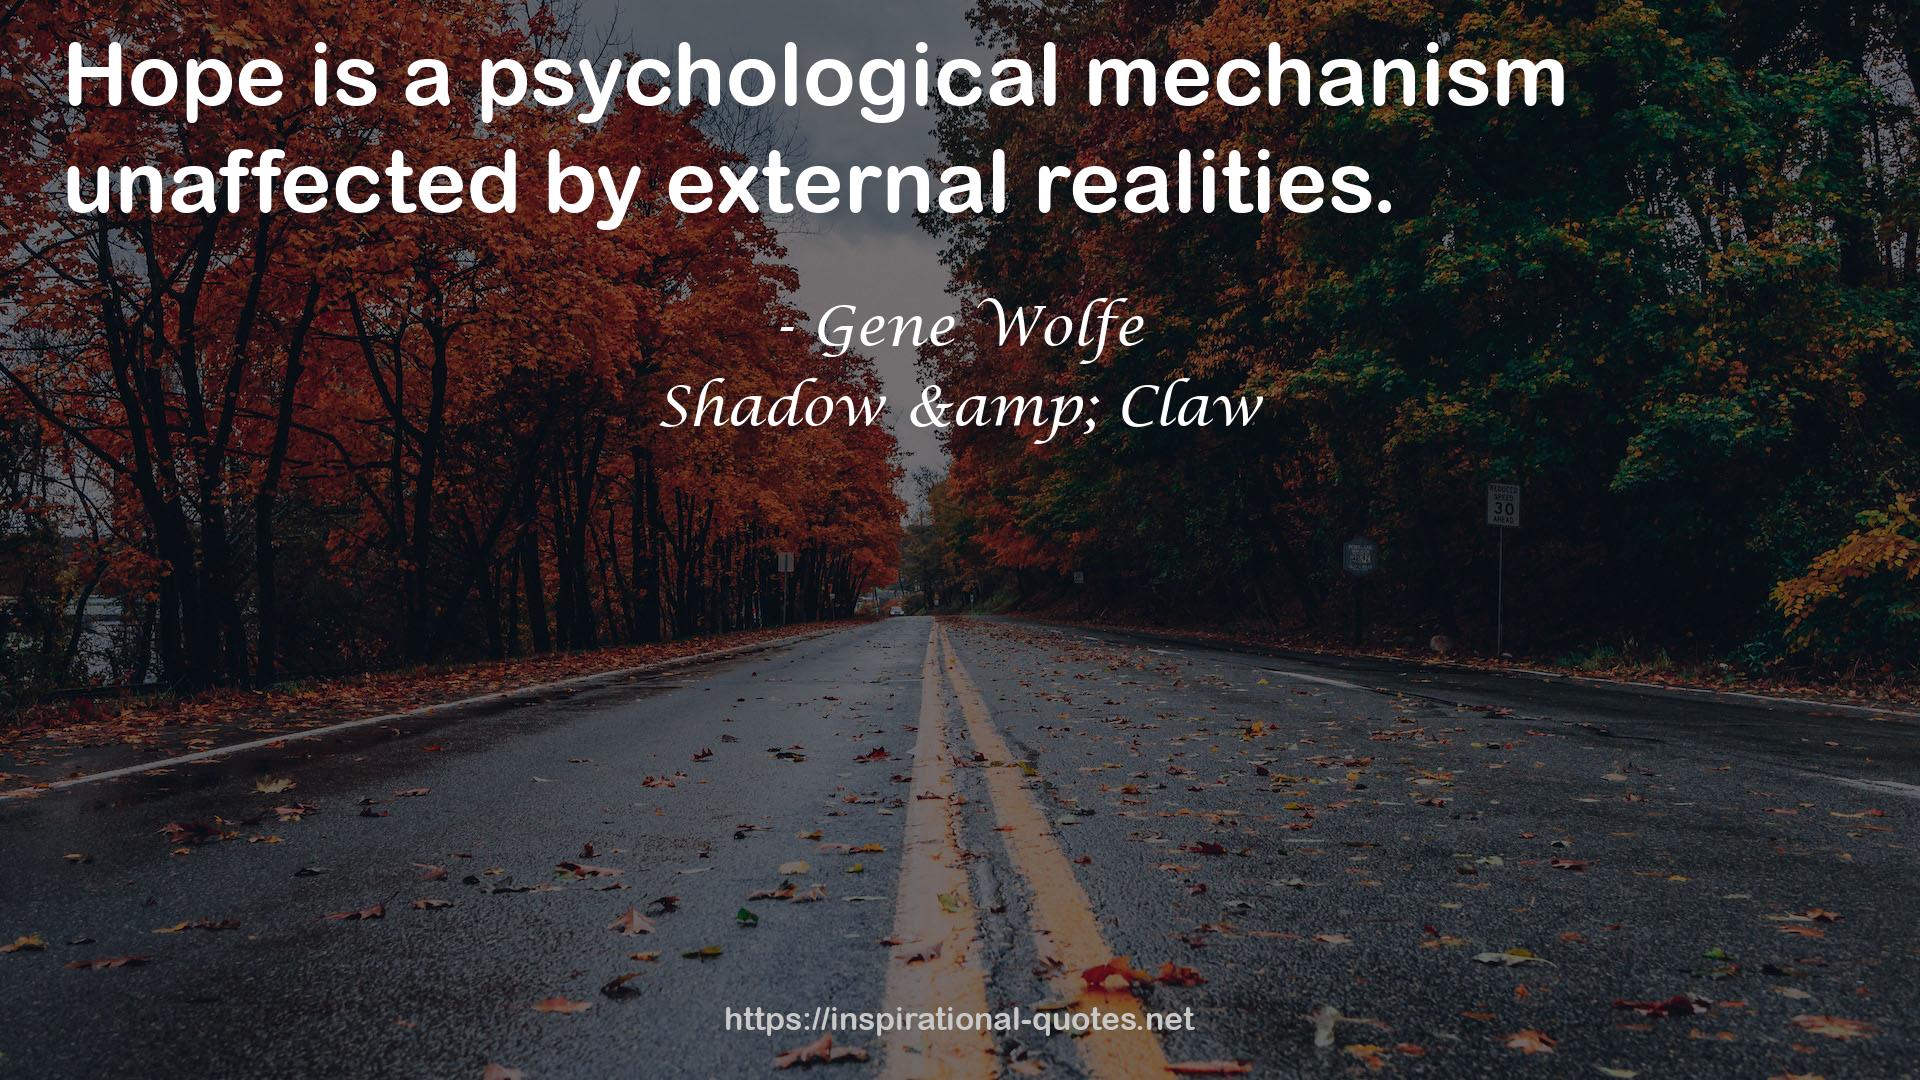 a psychological mechanism  QUOTES